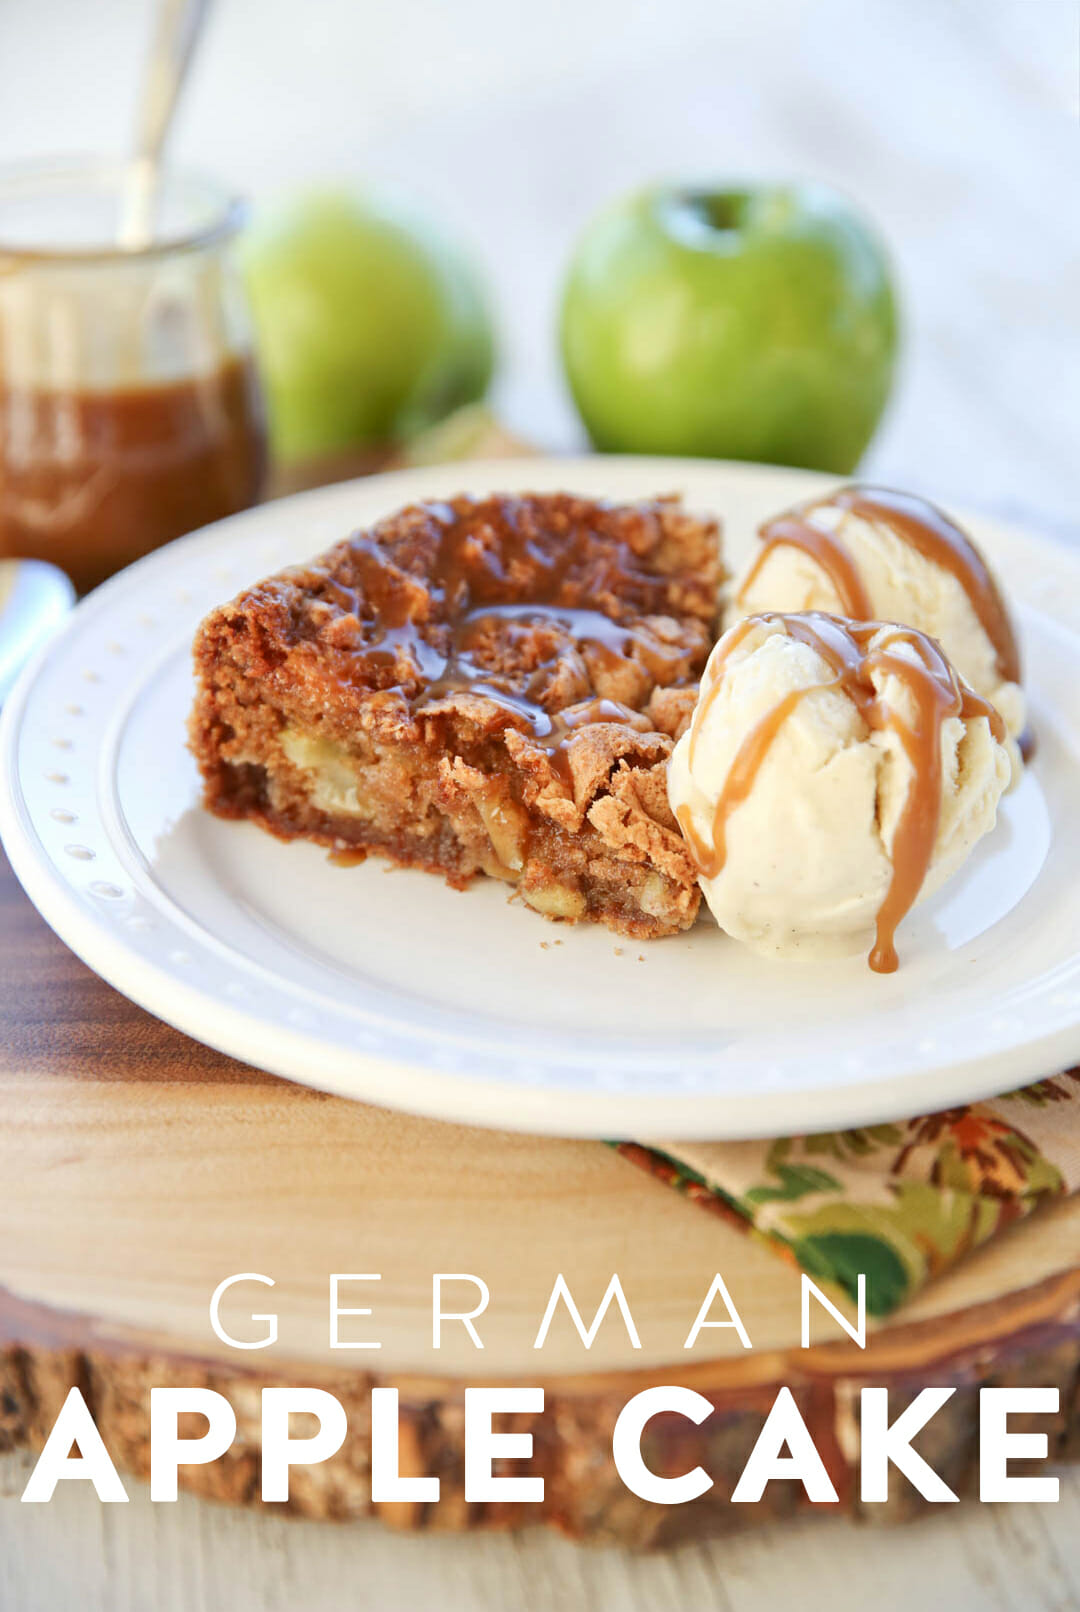 German Apple Cake from Our Best Bites